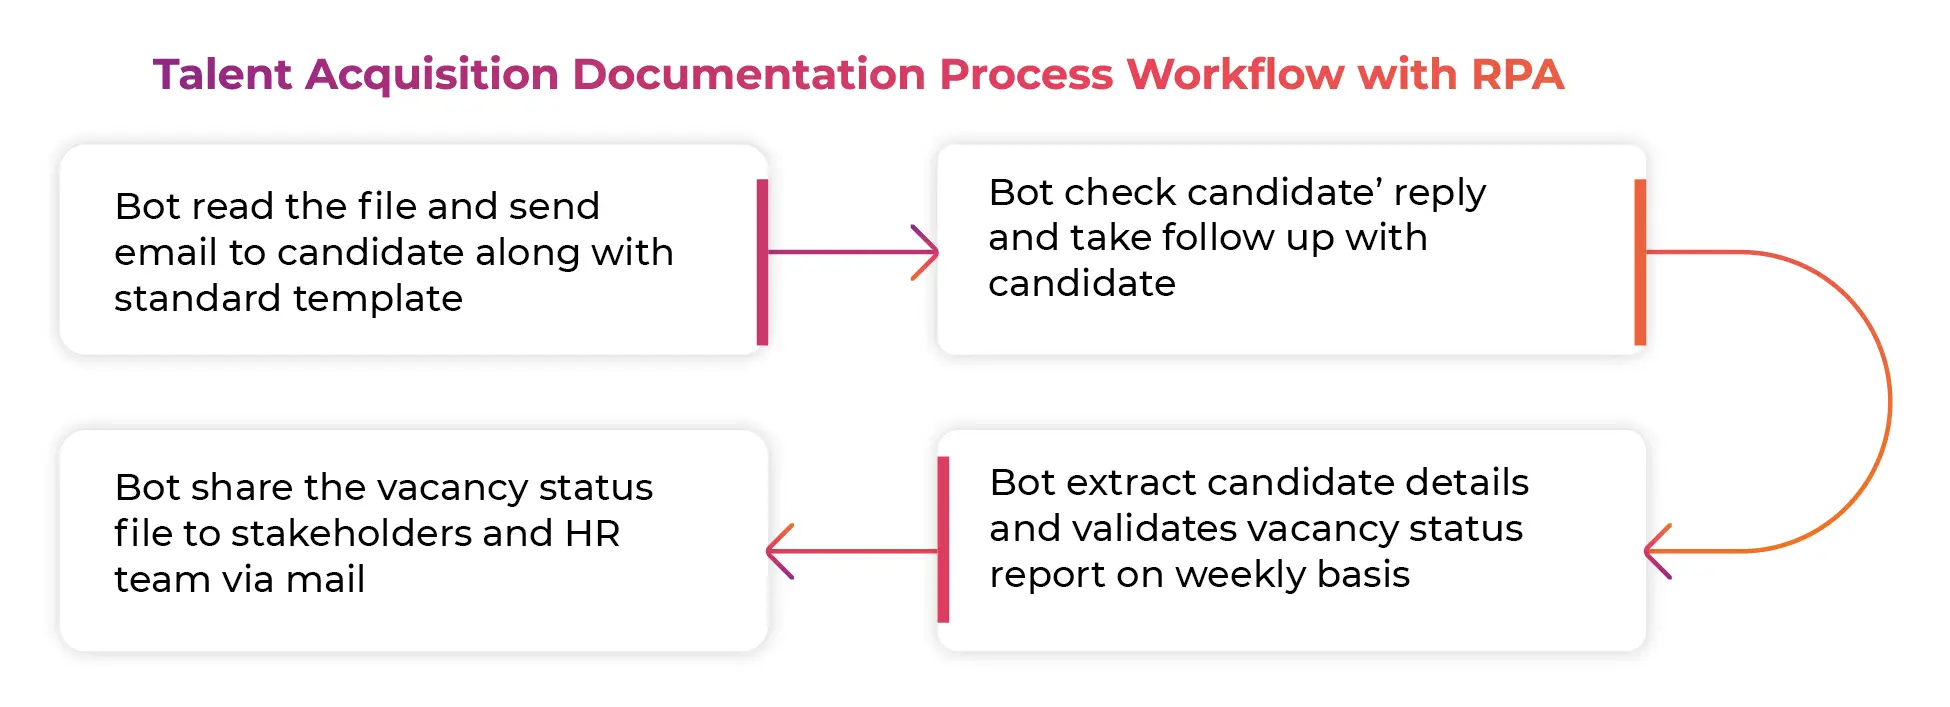 Talent Acquisition Documentation Process Workflow with RPA